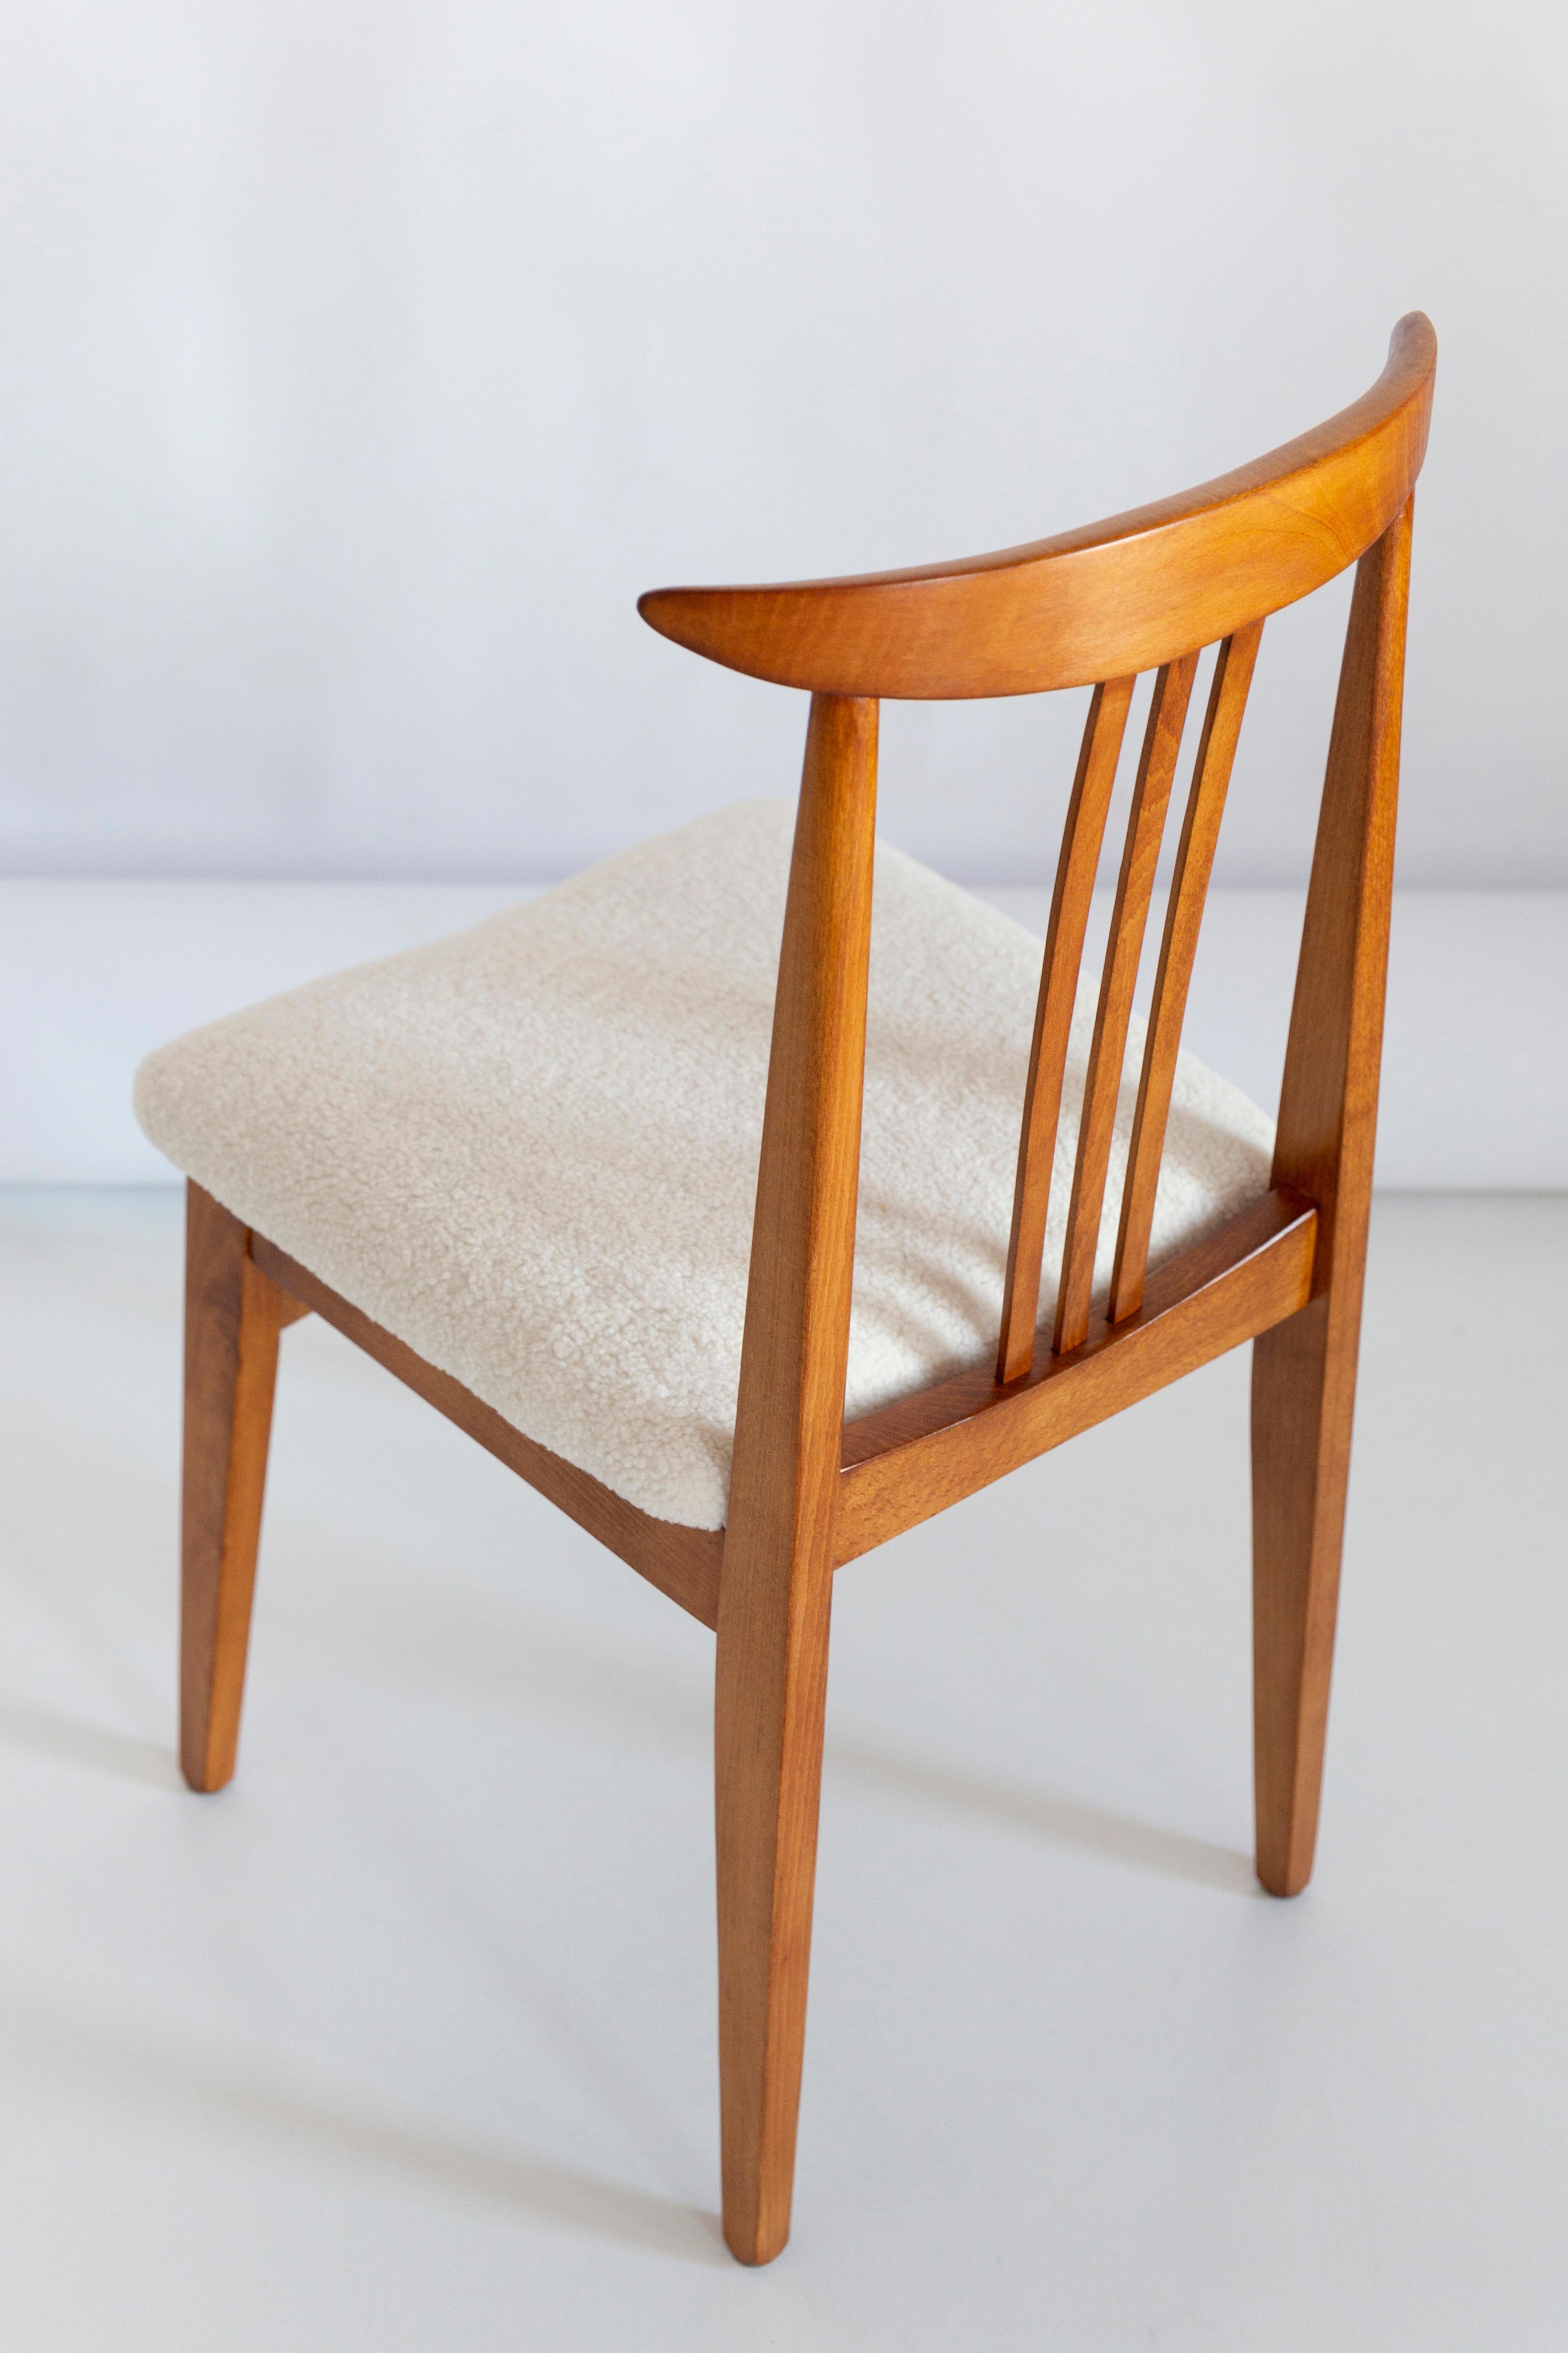 Eight Mid-Century Light Boucle Chair, Designed by M. Zielinski, Europe, 1960s For Sale 3